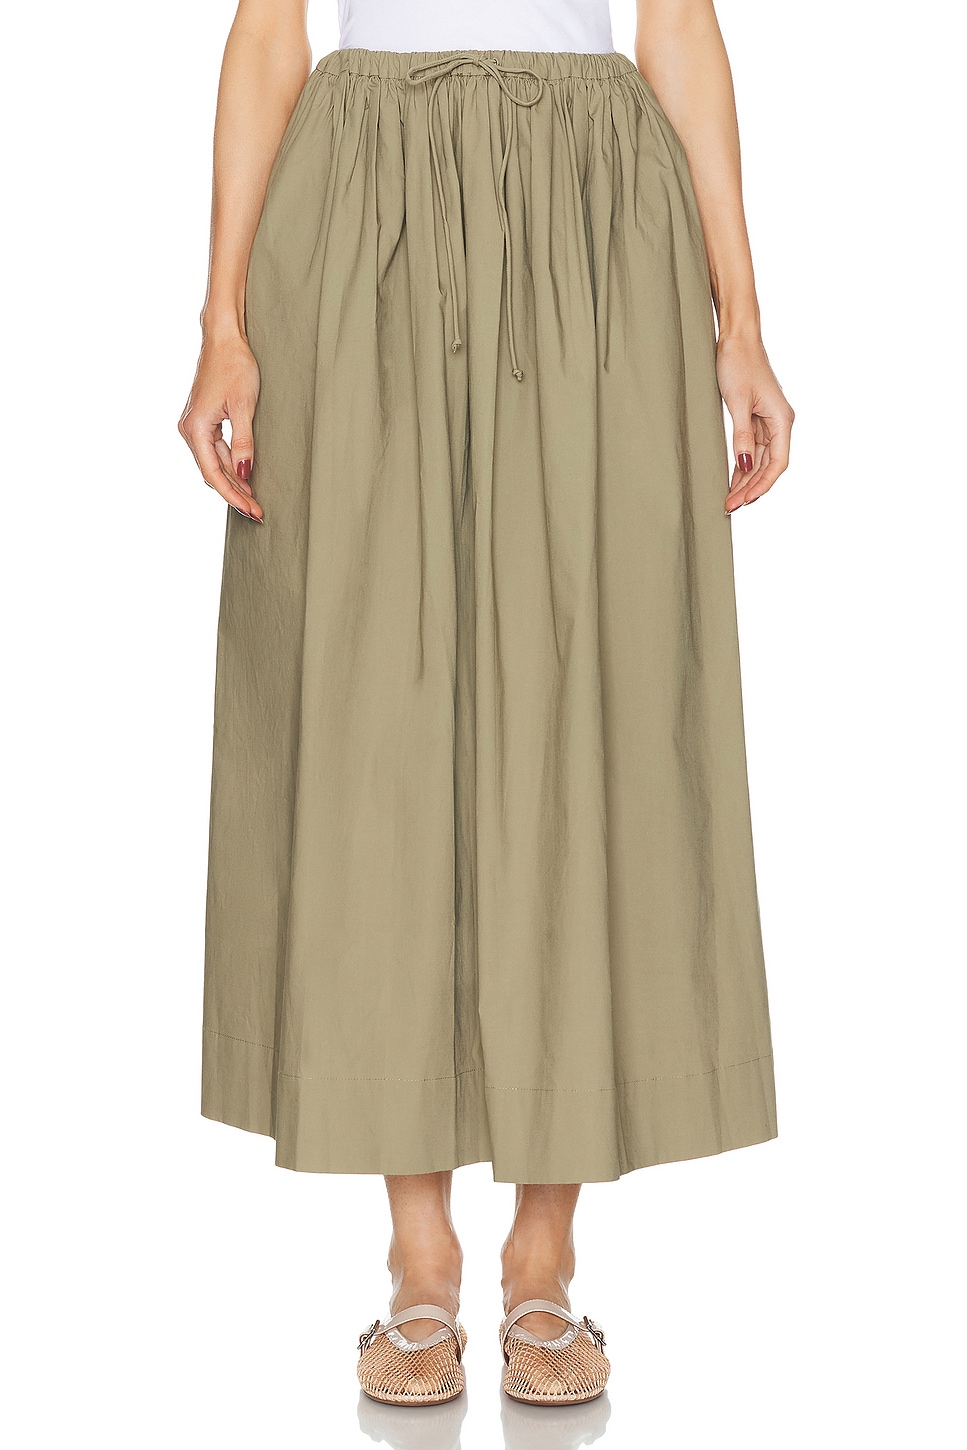 Image 1 of L'Academie by Marianna Simone Maxi Skirt in Olive